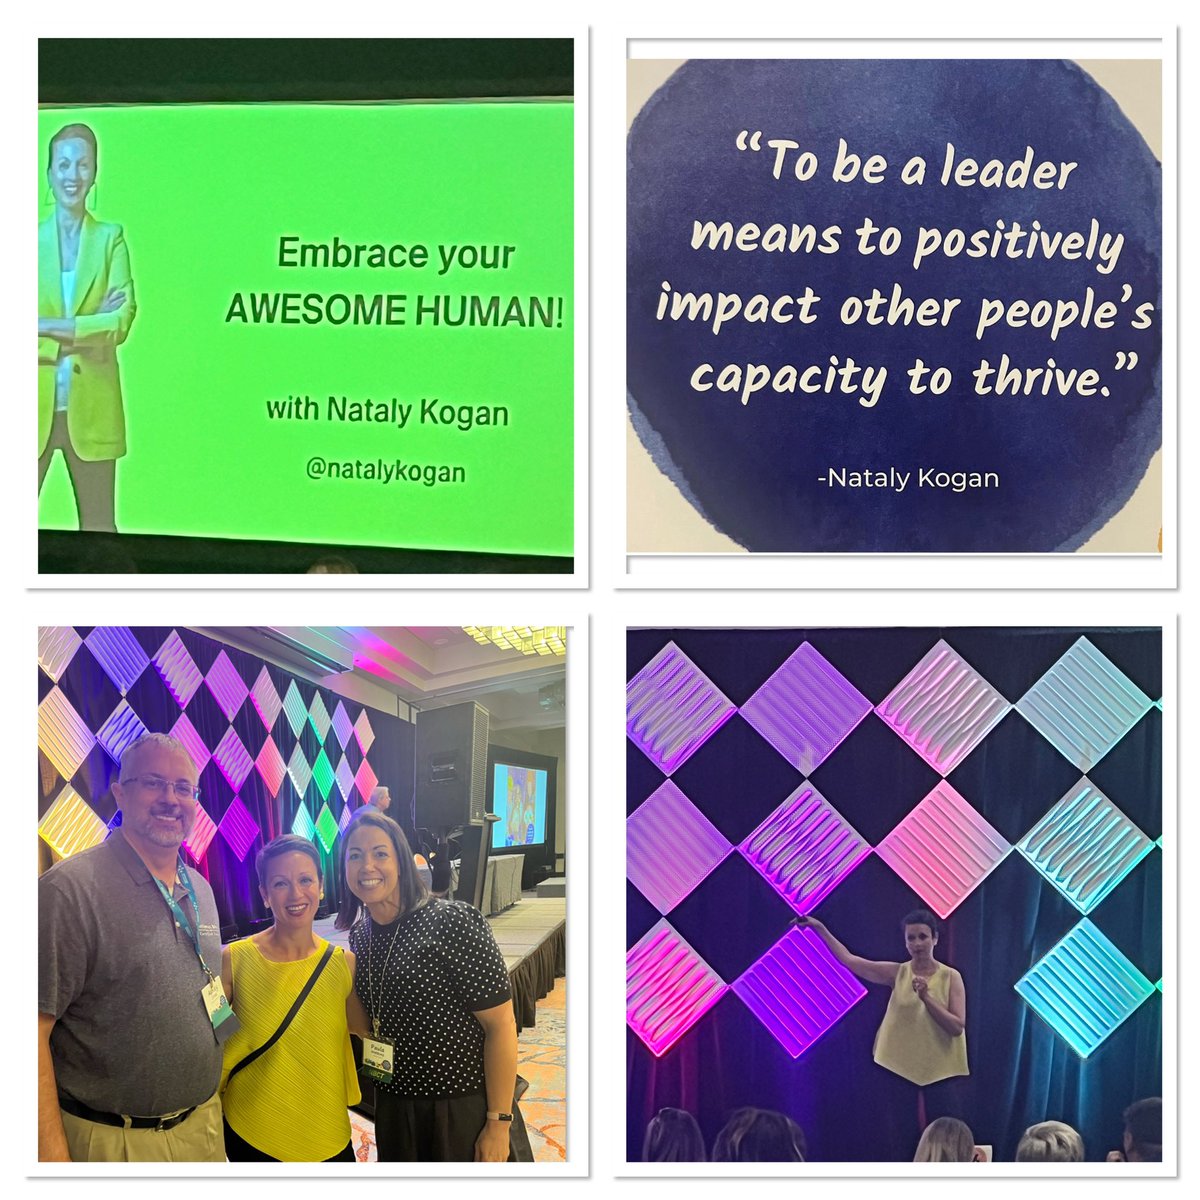 Really amazing keynote yesterday @natalykogan at @azk12 Teacher Leadership Institute! Your book, and podcasts have helped me and inspire me! They are AWESOME! #AZTEACHERLEADER